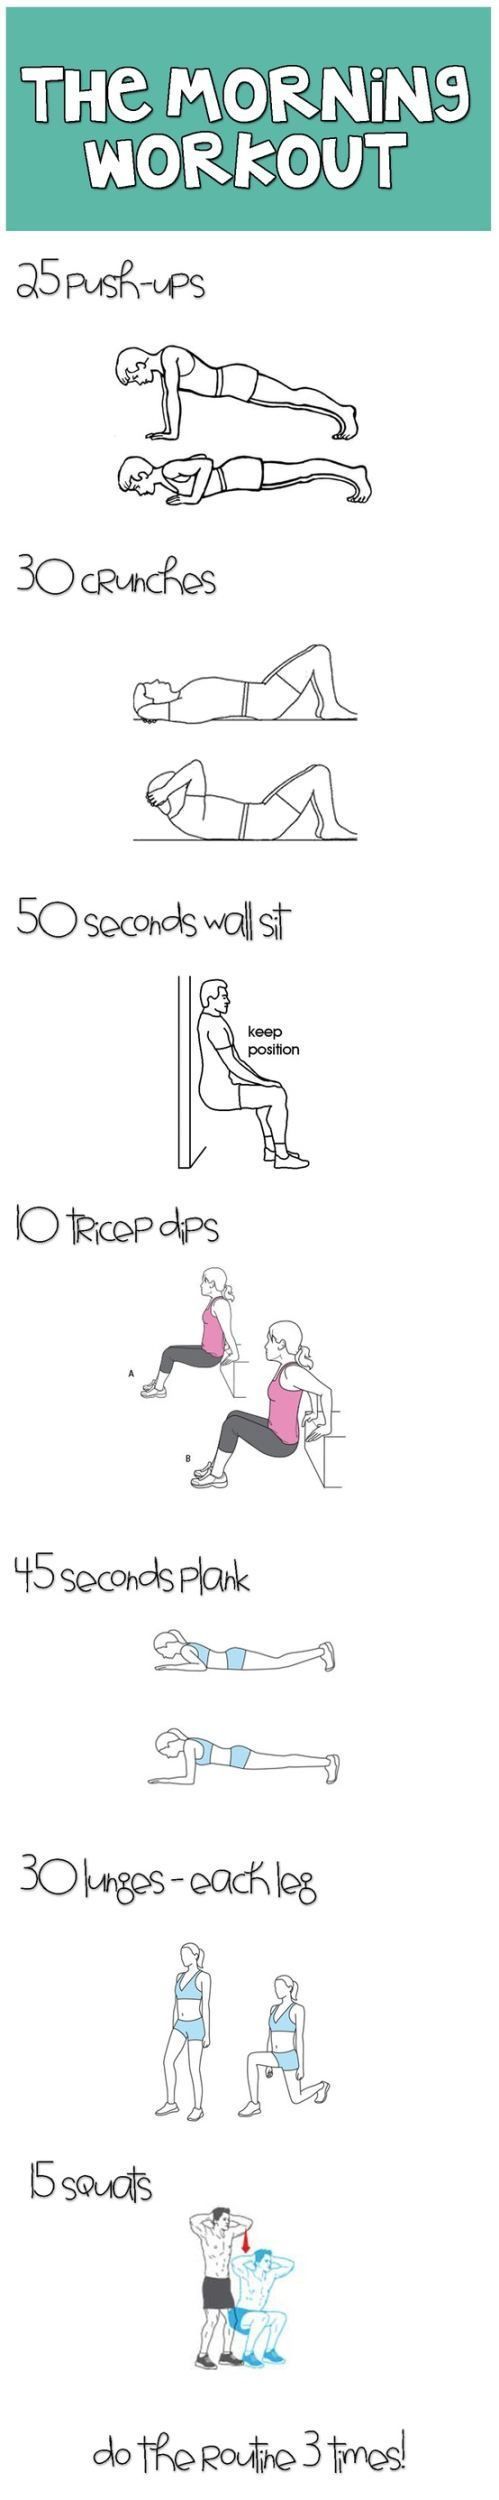 Morning Workout- Also another good   beginners workout. Do as many circuits as you can =D